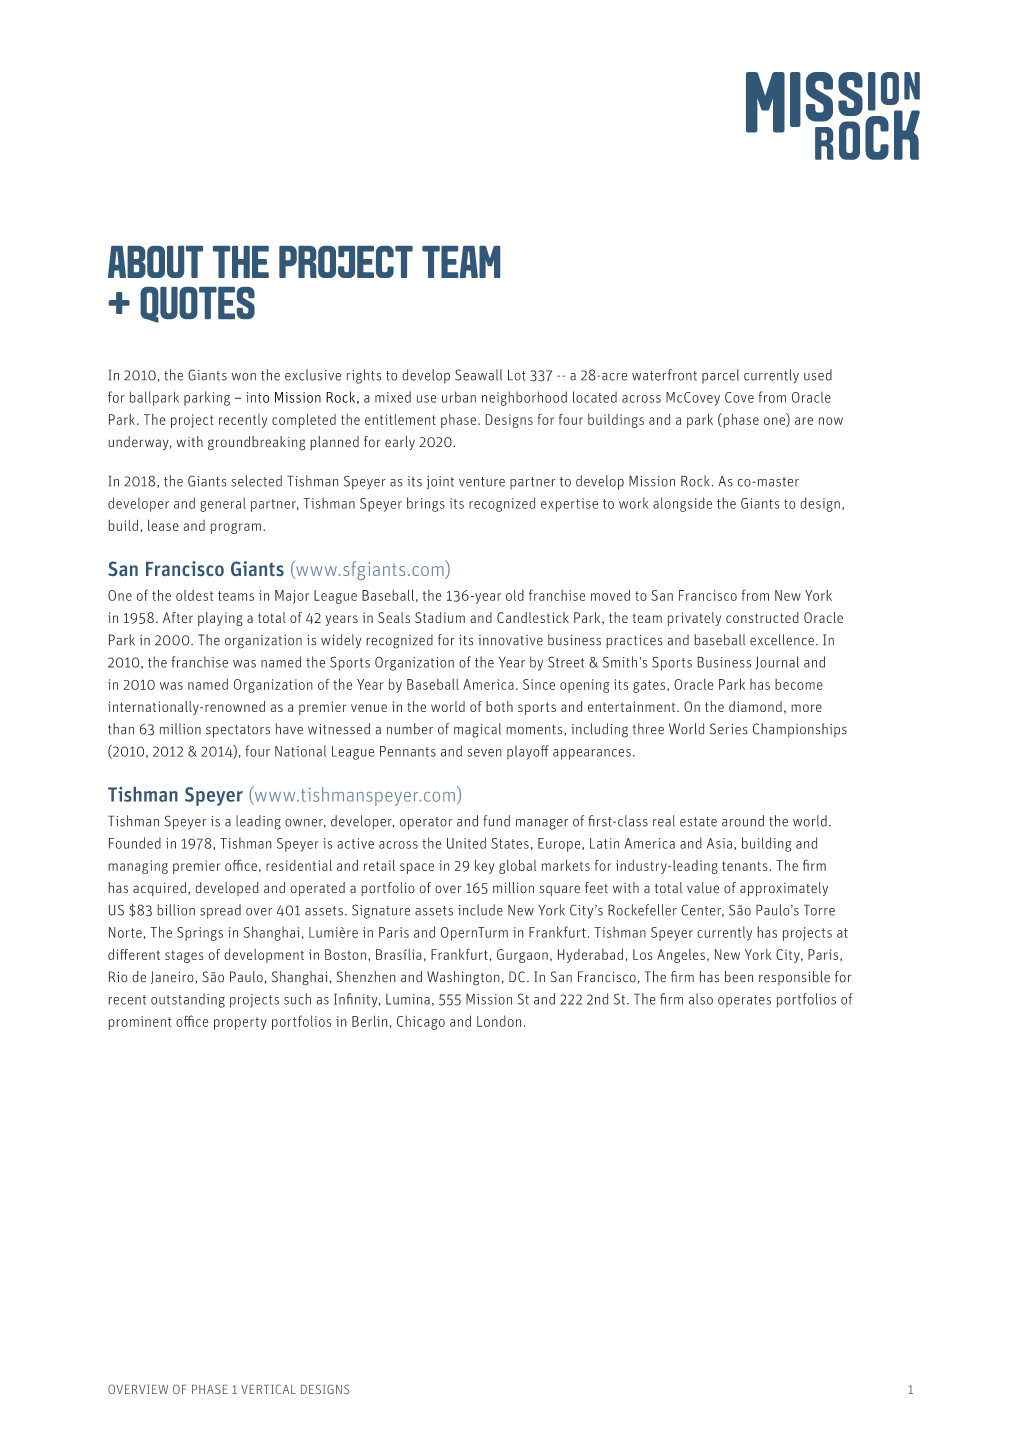 Project Team + Quotes